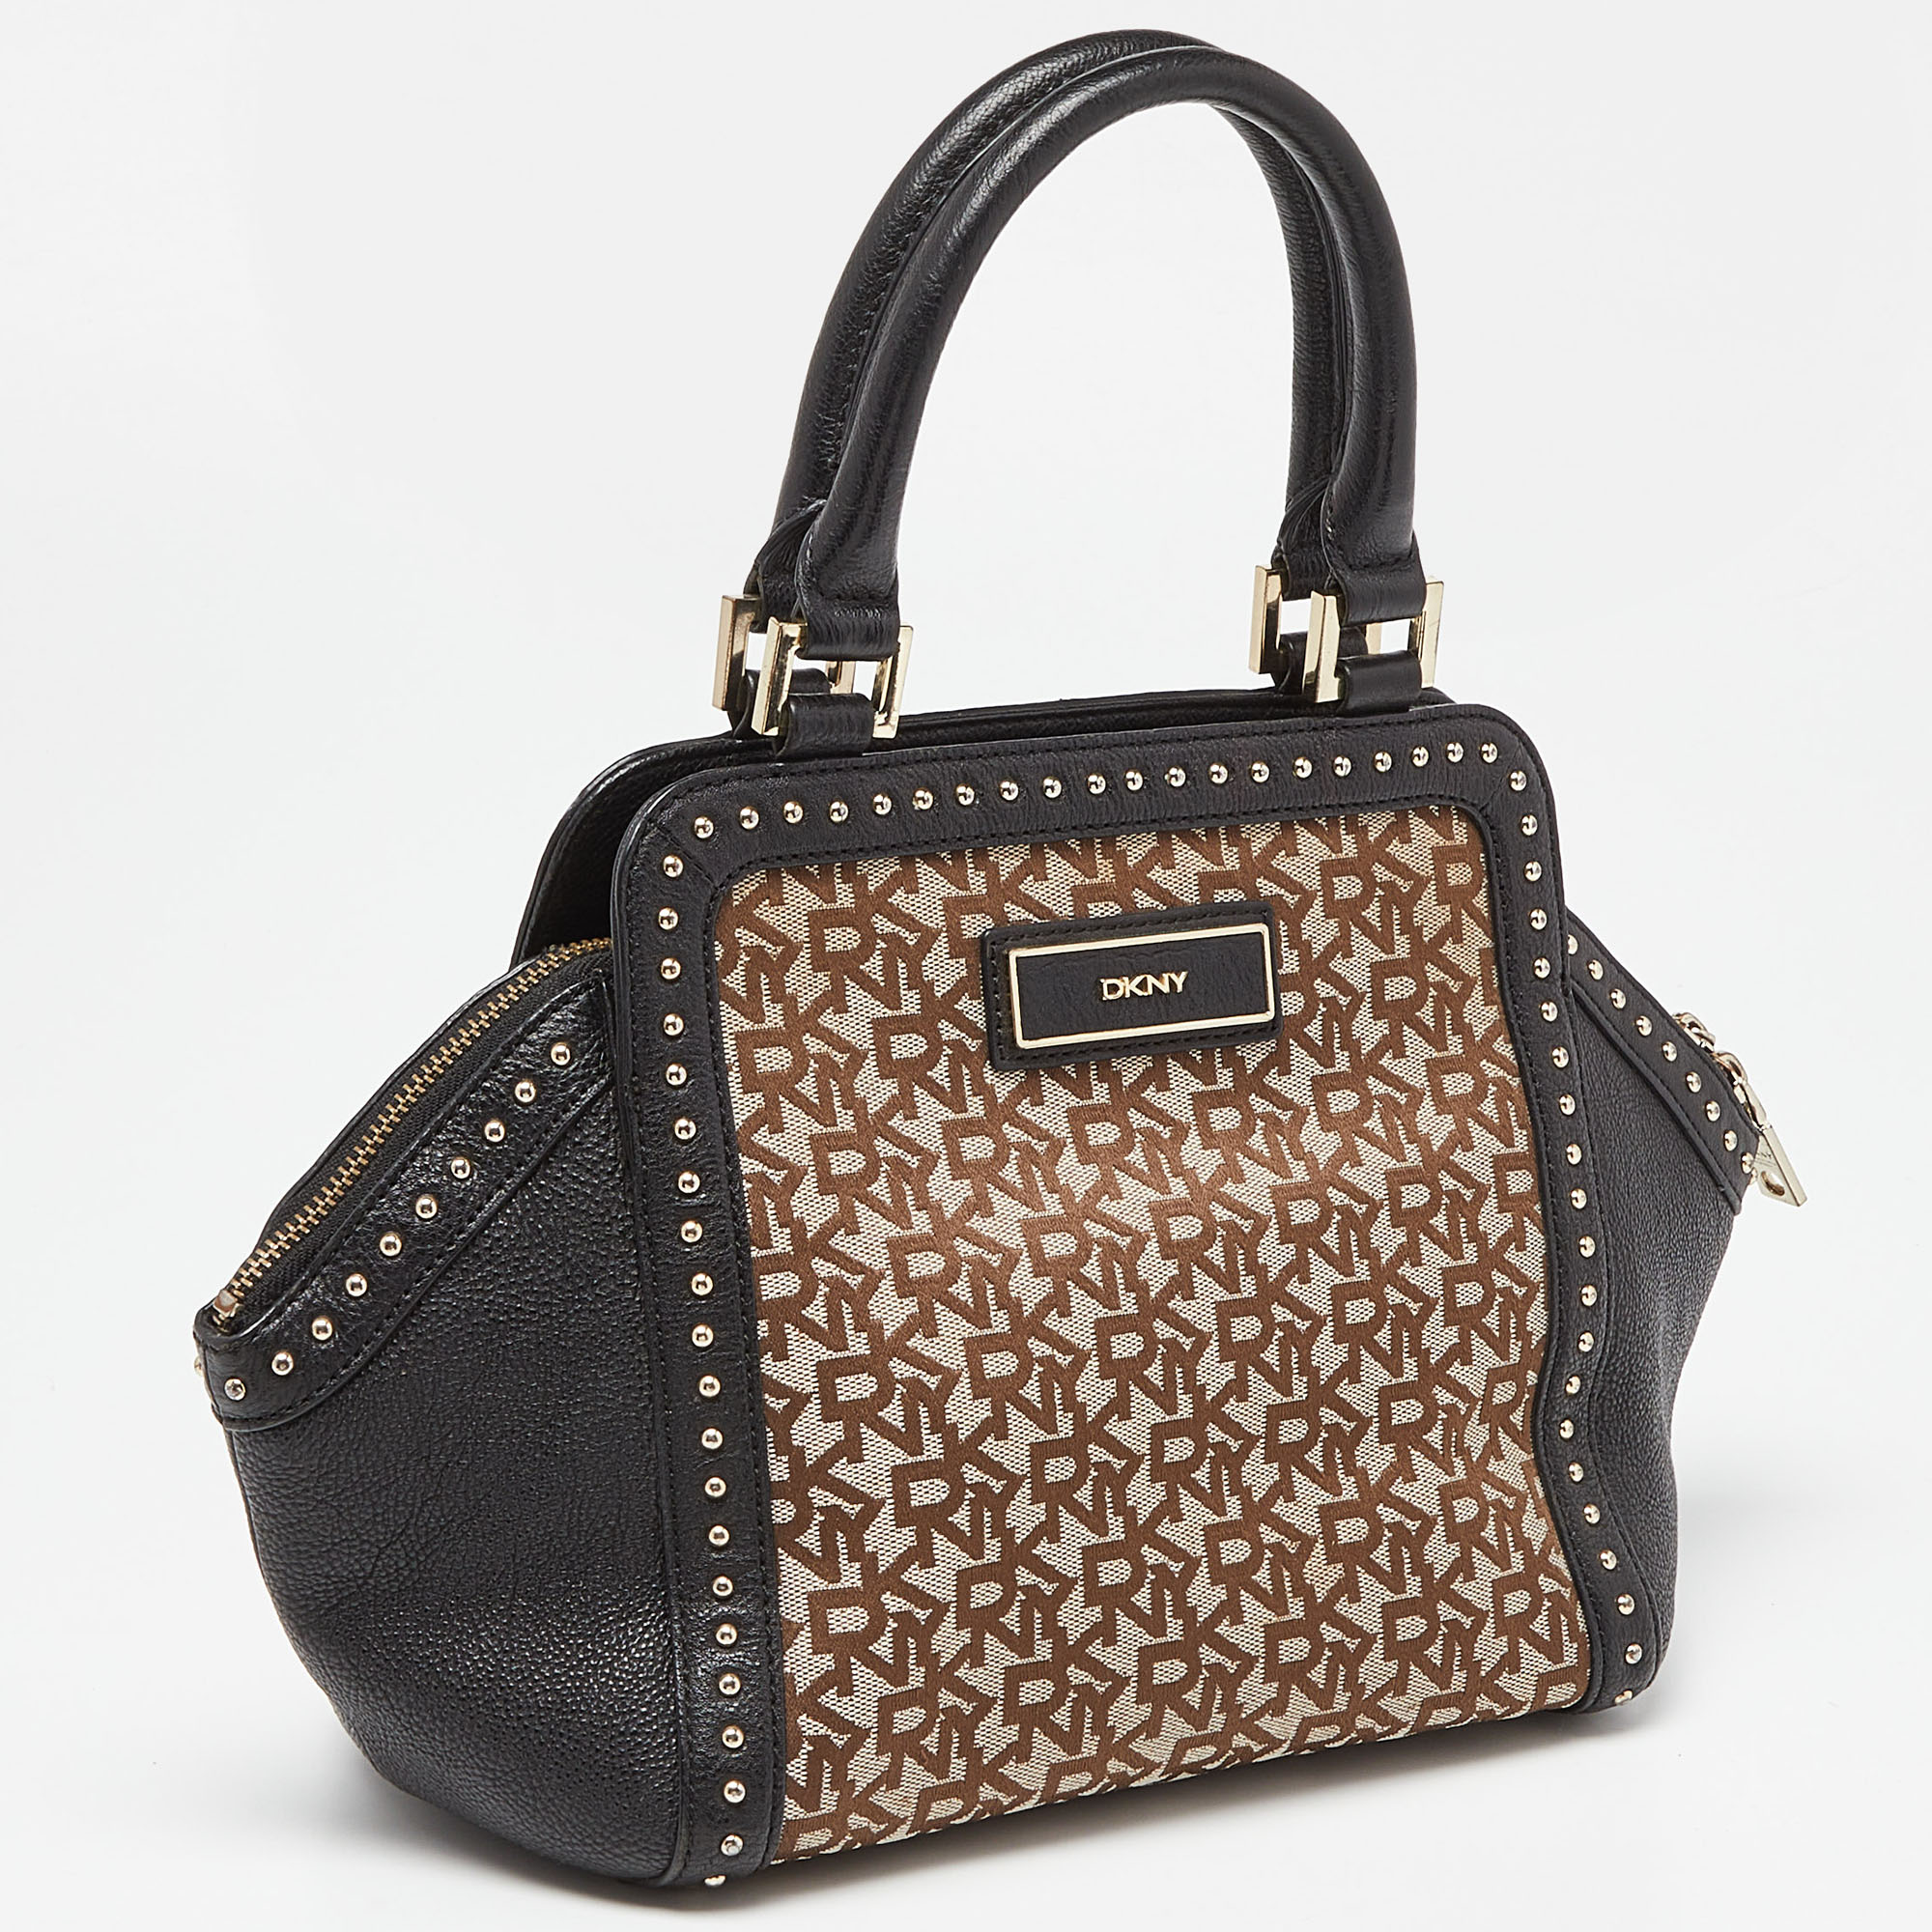 DKNY Beige/Black Signature Canvas And Leather Studded Satchel